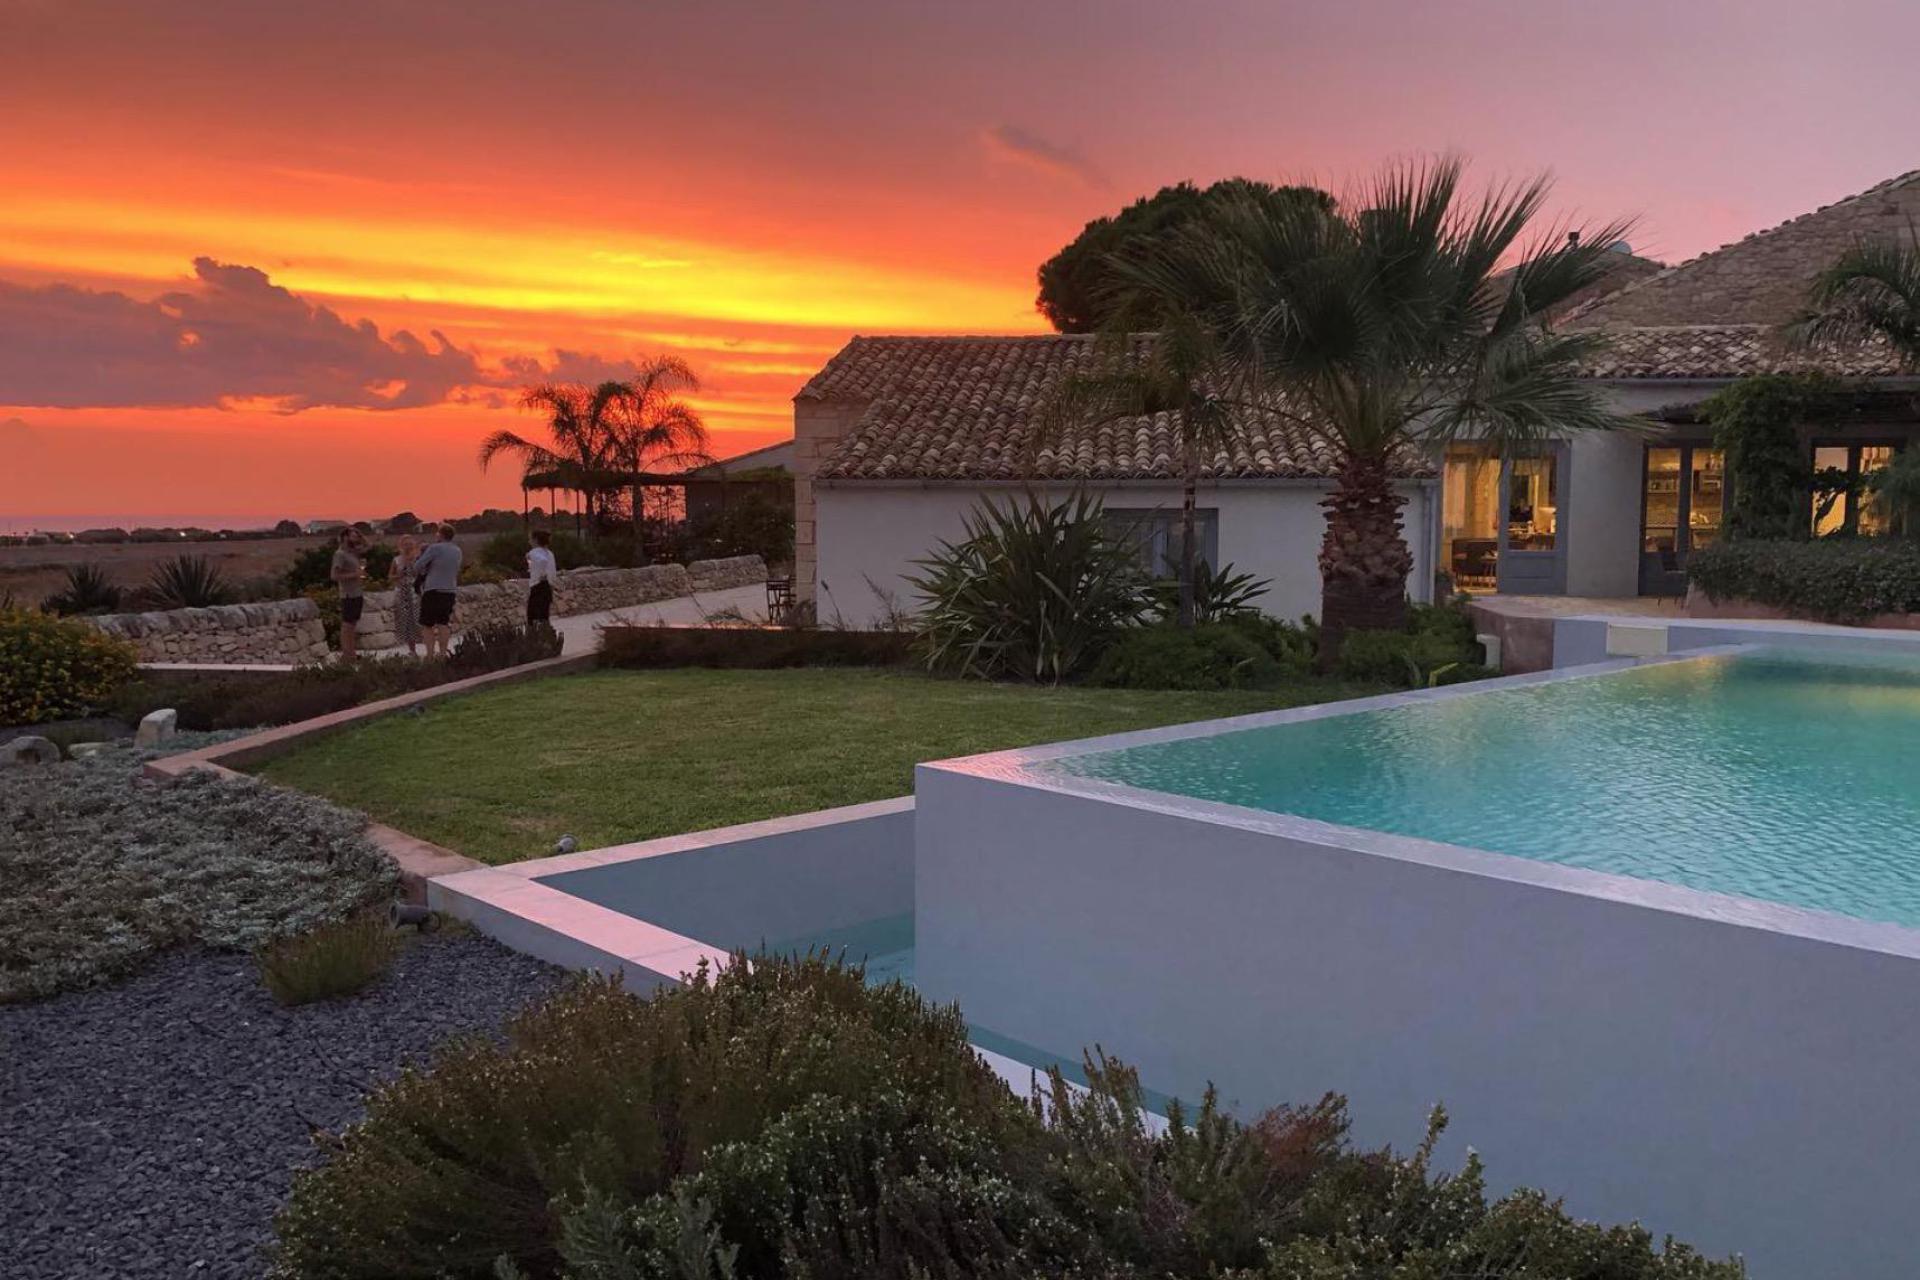 Agriturismo Sicily Great Sicilian hospitality and sea views!